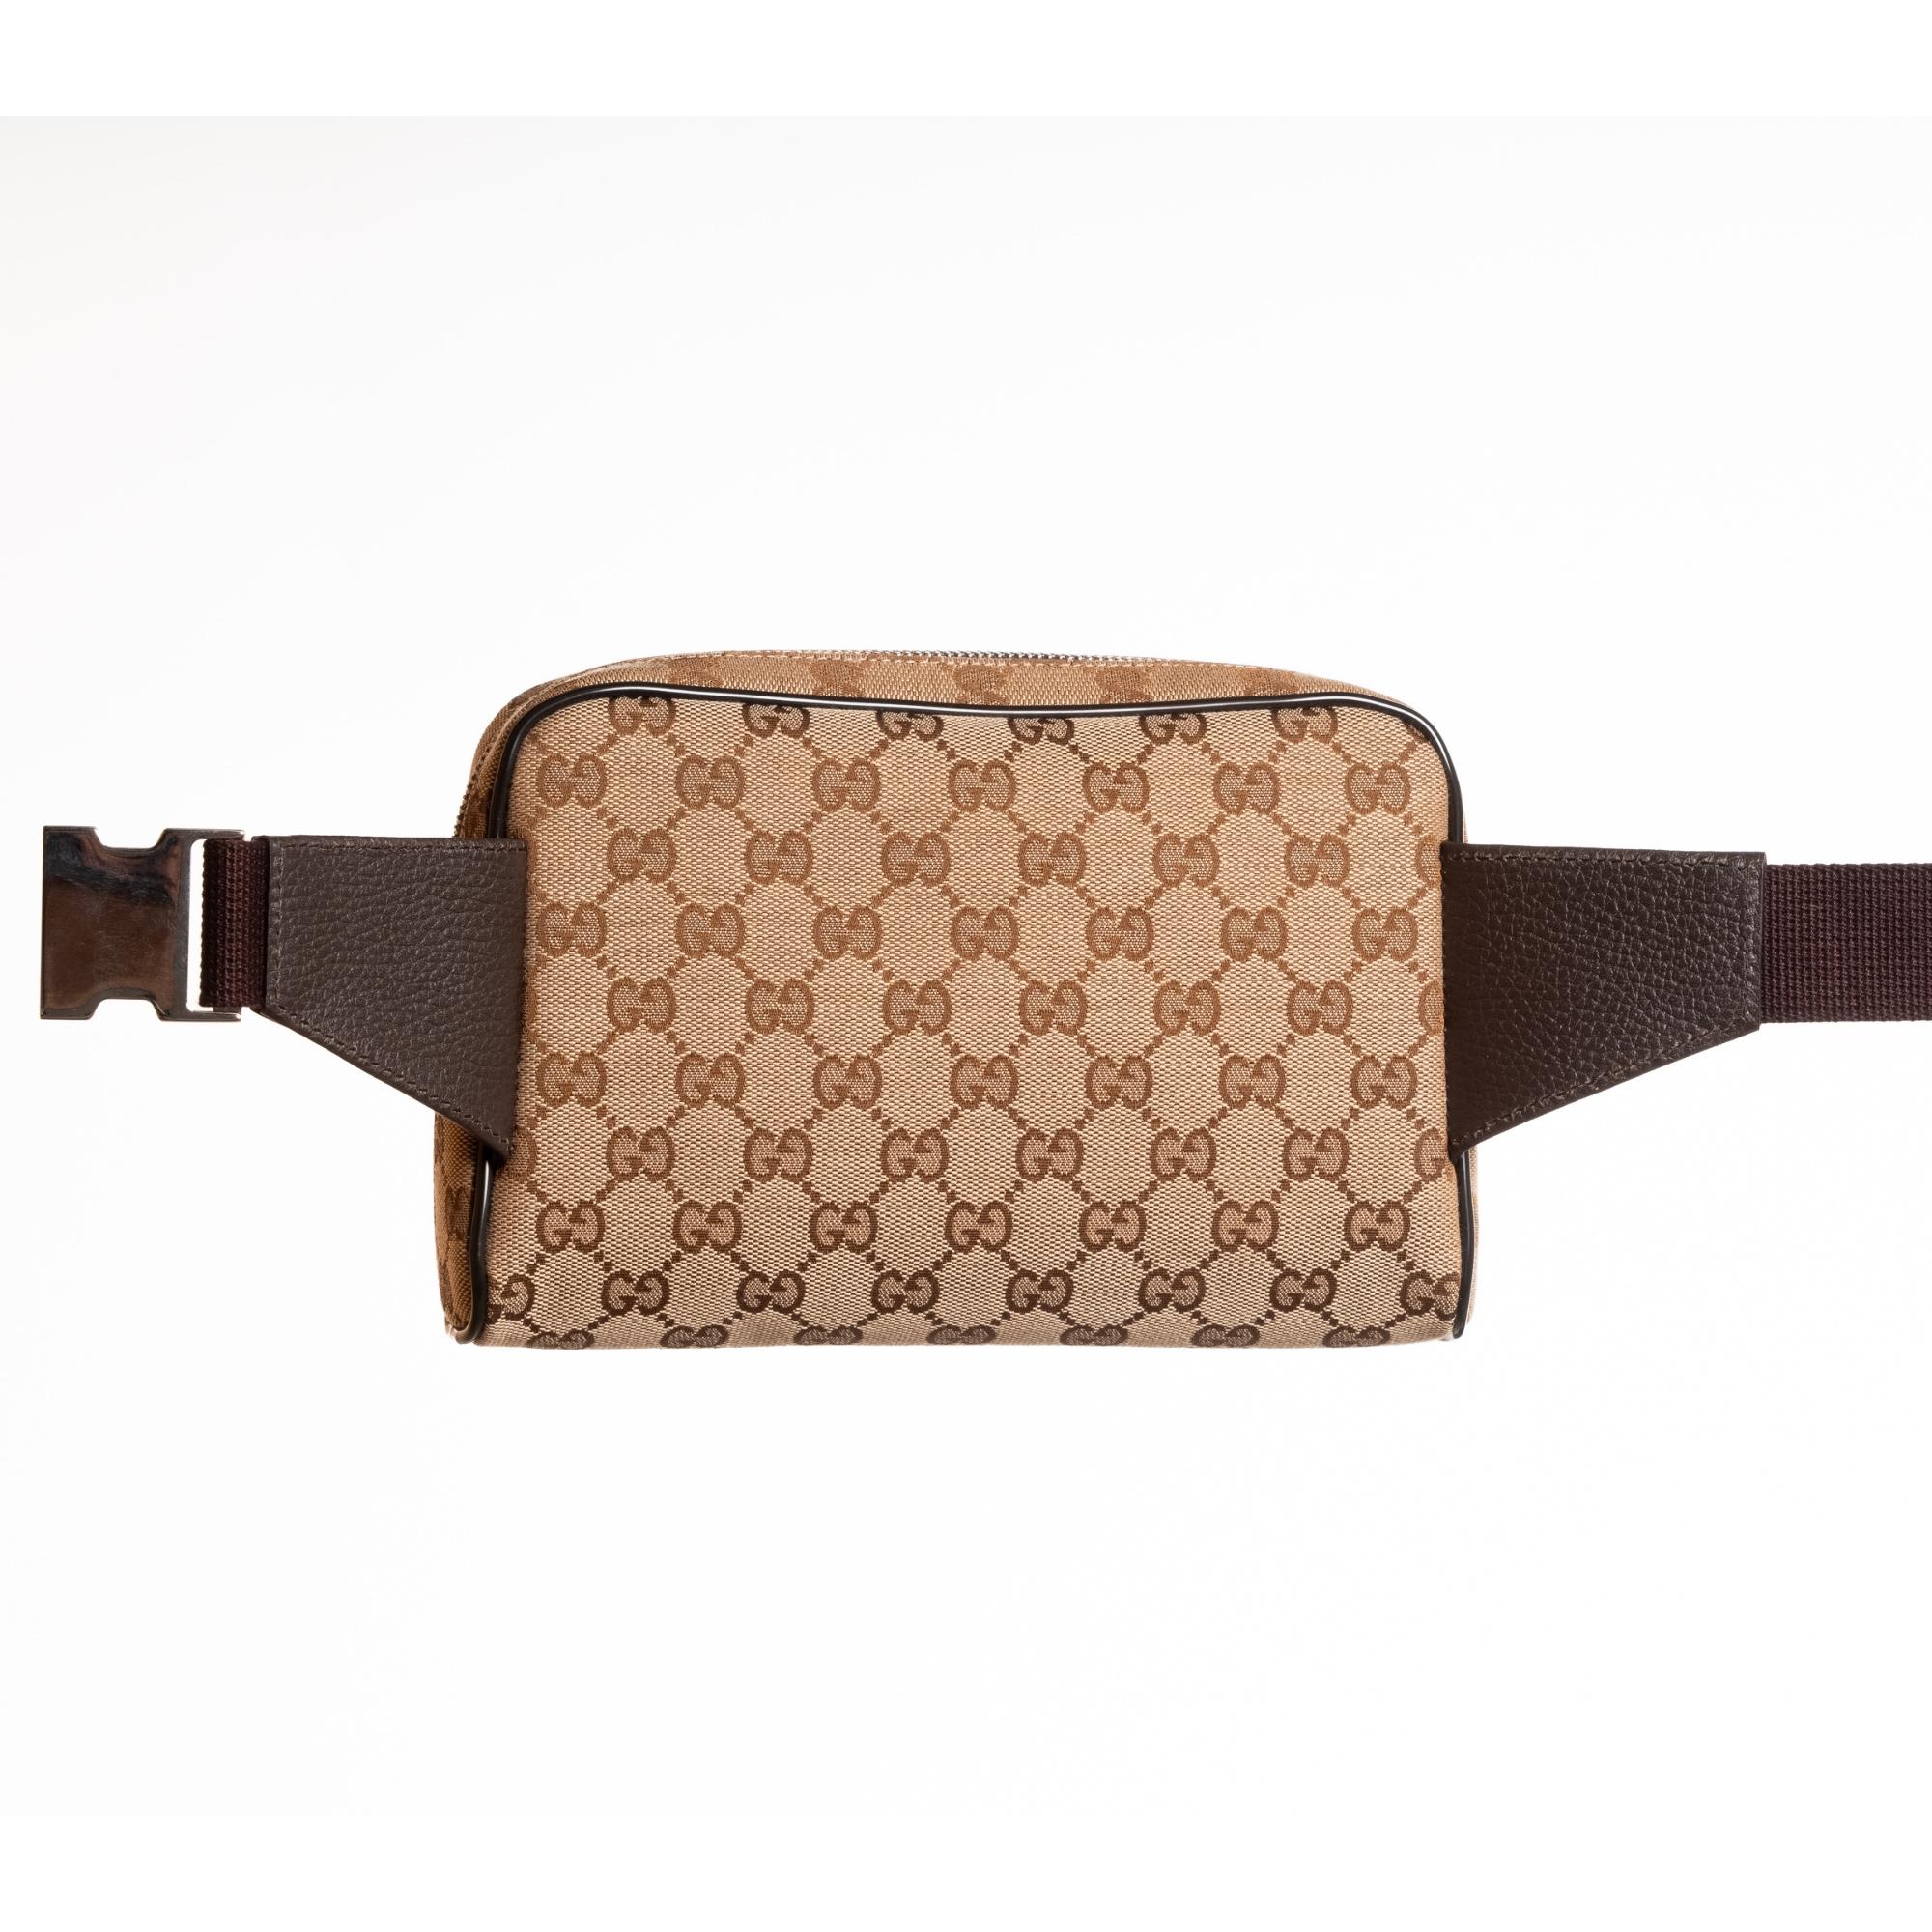 This classic Gucci belt bag in ebony/beige monogram canvas is made of canvas with canvas with leather finishes. The bag features the classic monogram print, leather pipping in contrasting brown, top zip closure, a woven fabric bet with buckle and an